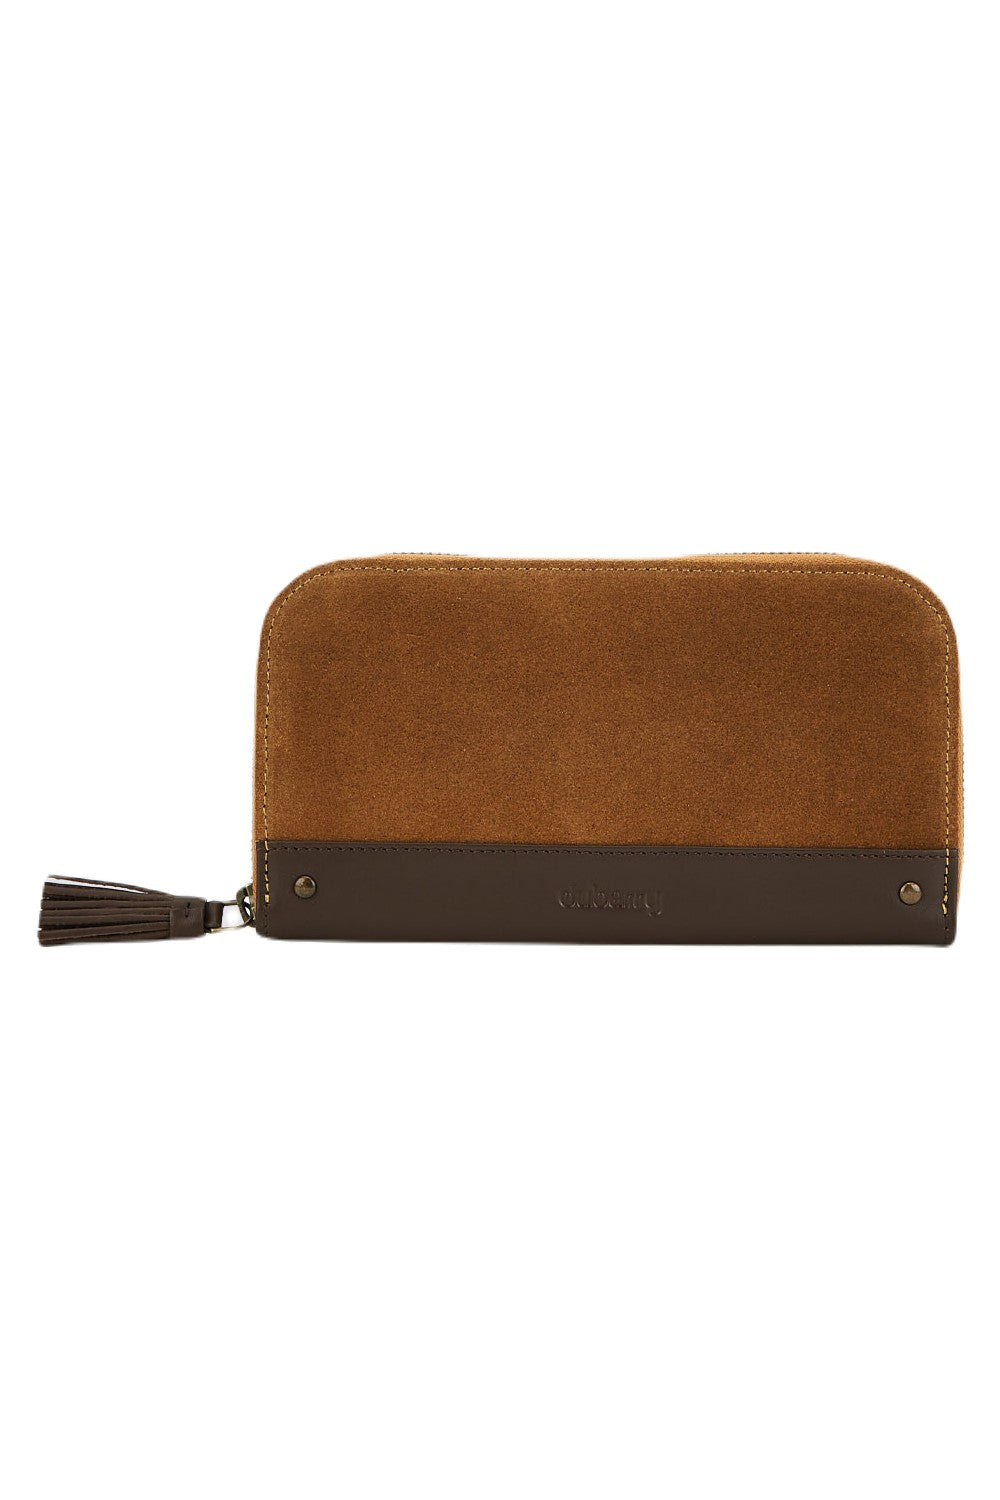 Herdwick Tweed Potter wallet: Purse: Quality British made: Worsted